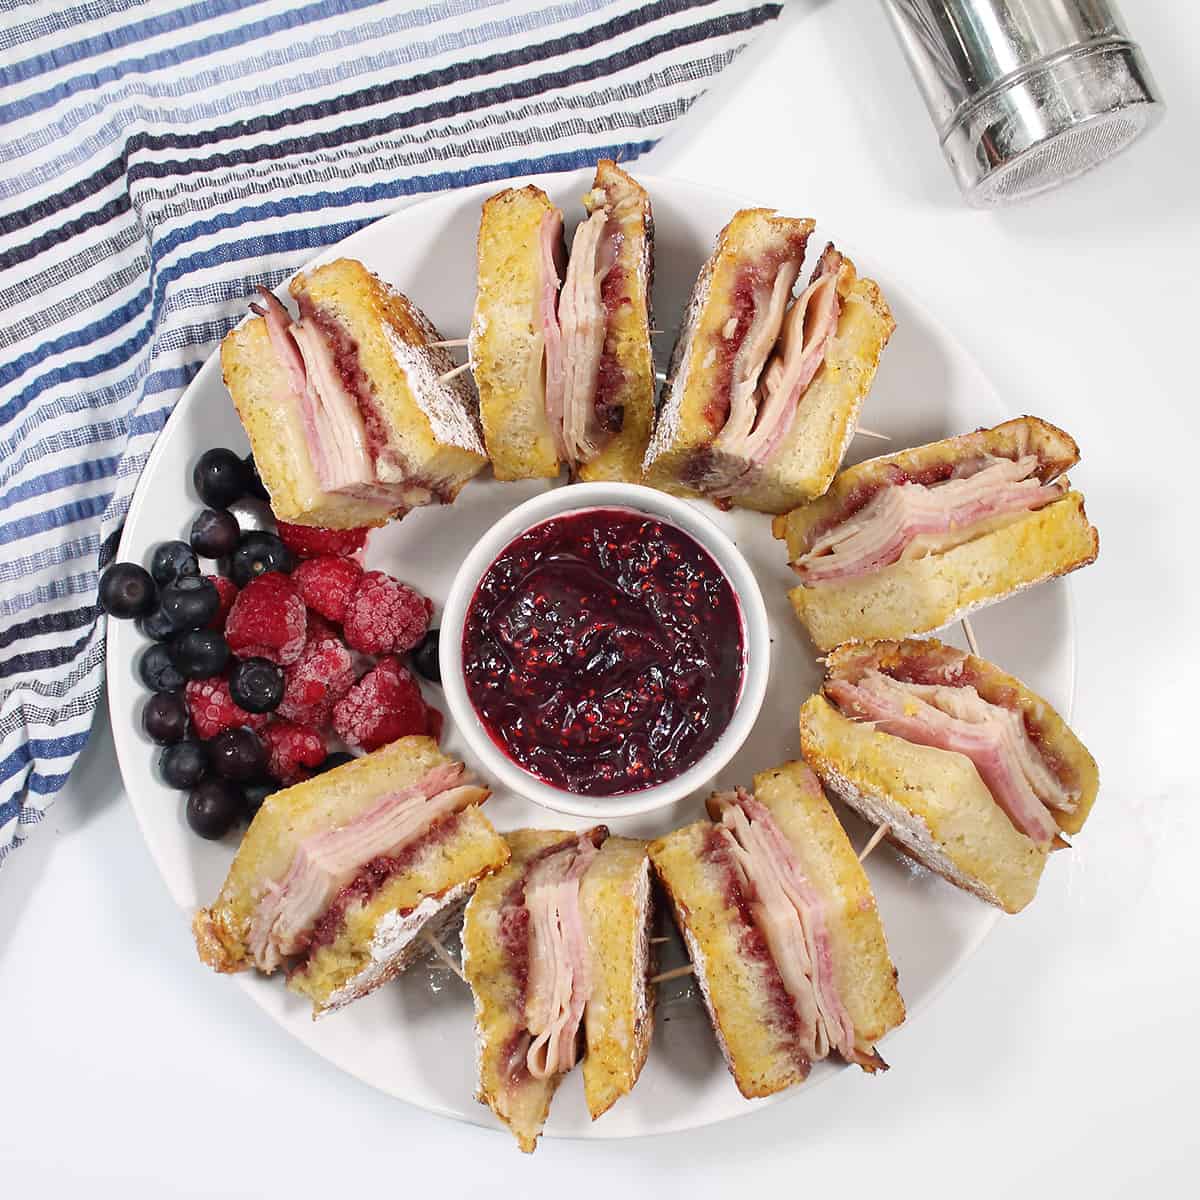 Overhead of quartered sandwiches with fruit and jam.